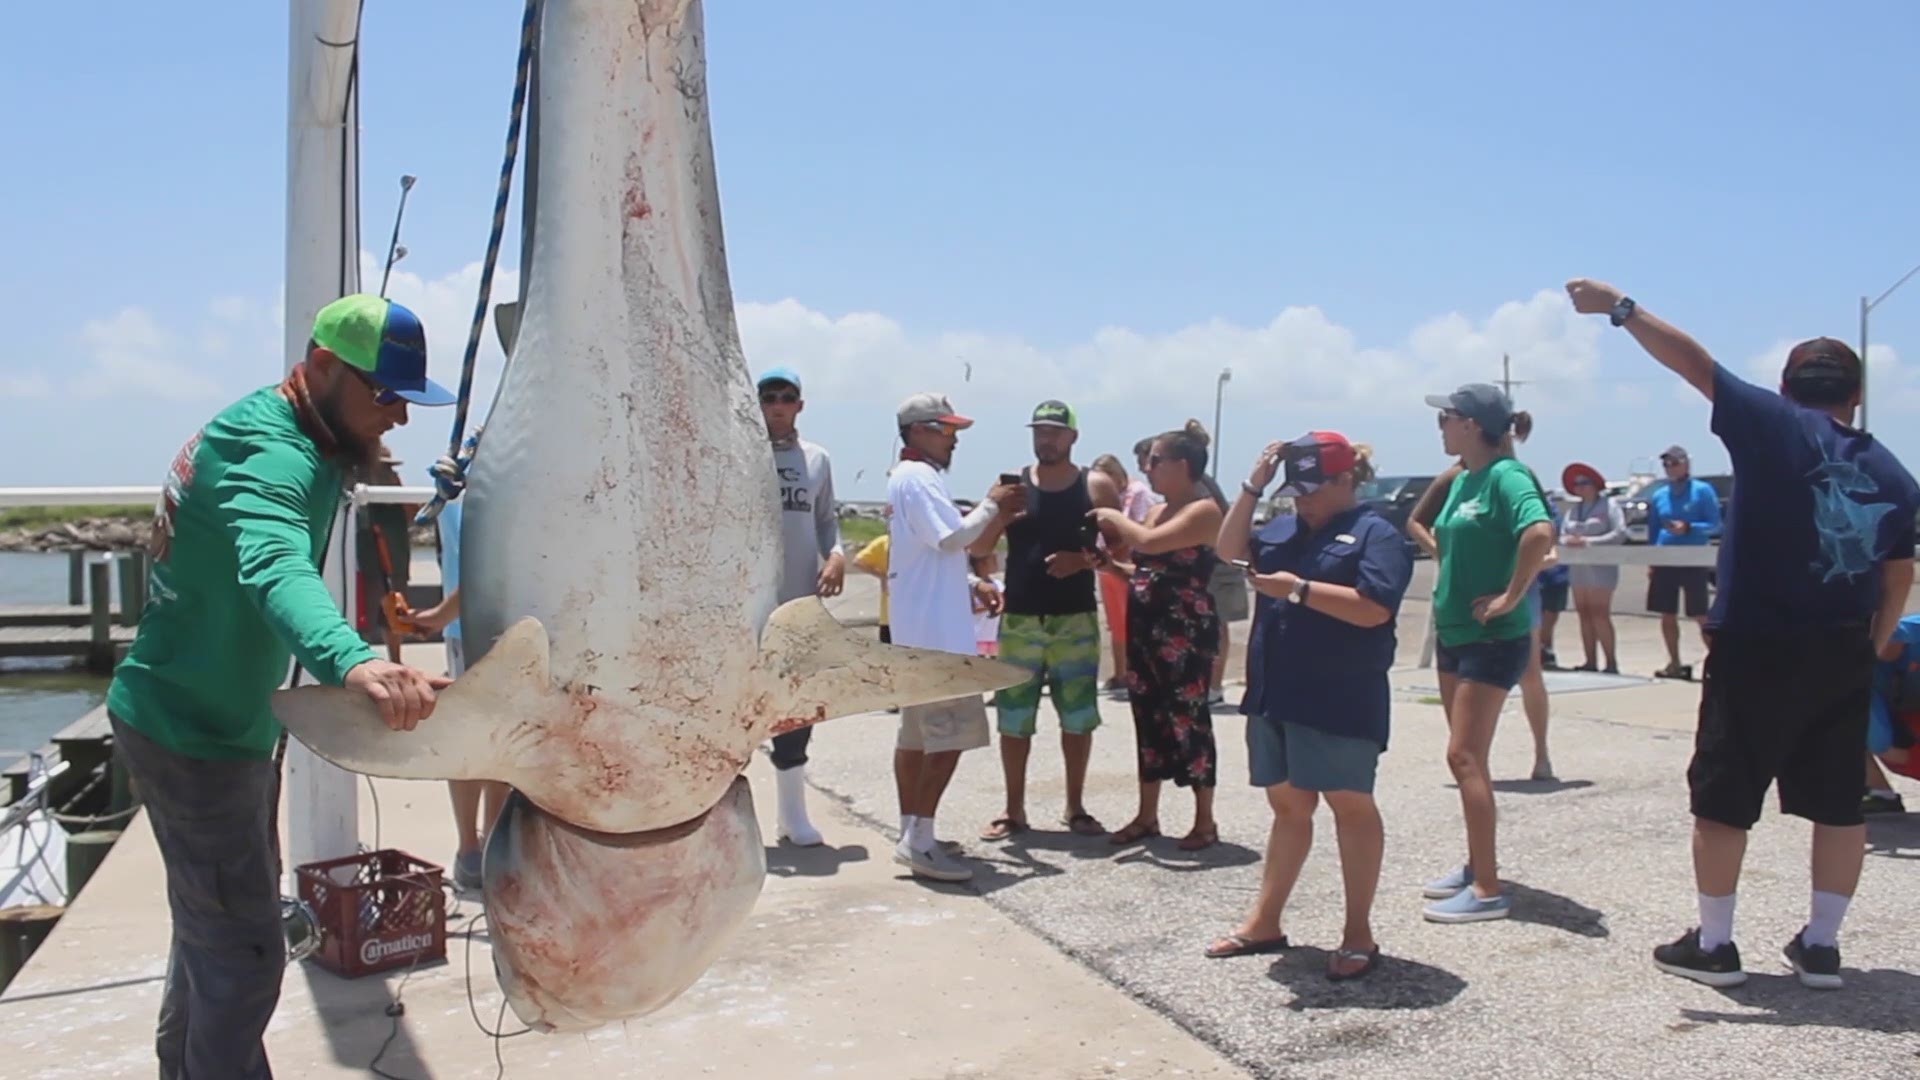 A tiger shark weighing more than 500 pounds was caught at a fishing tournament at the Texas City Dike on Saturday.